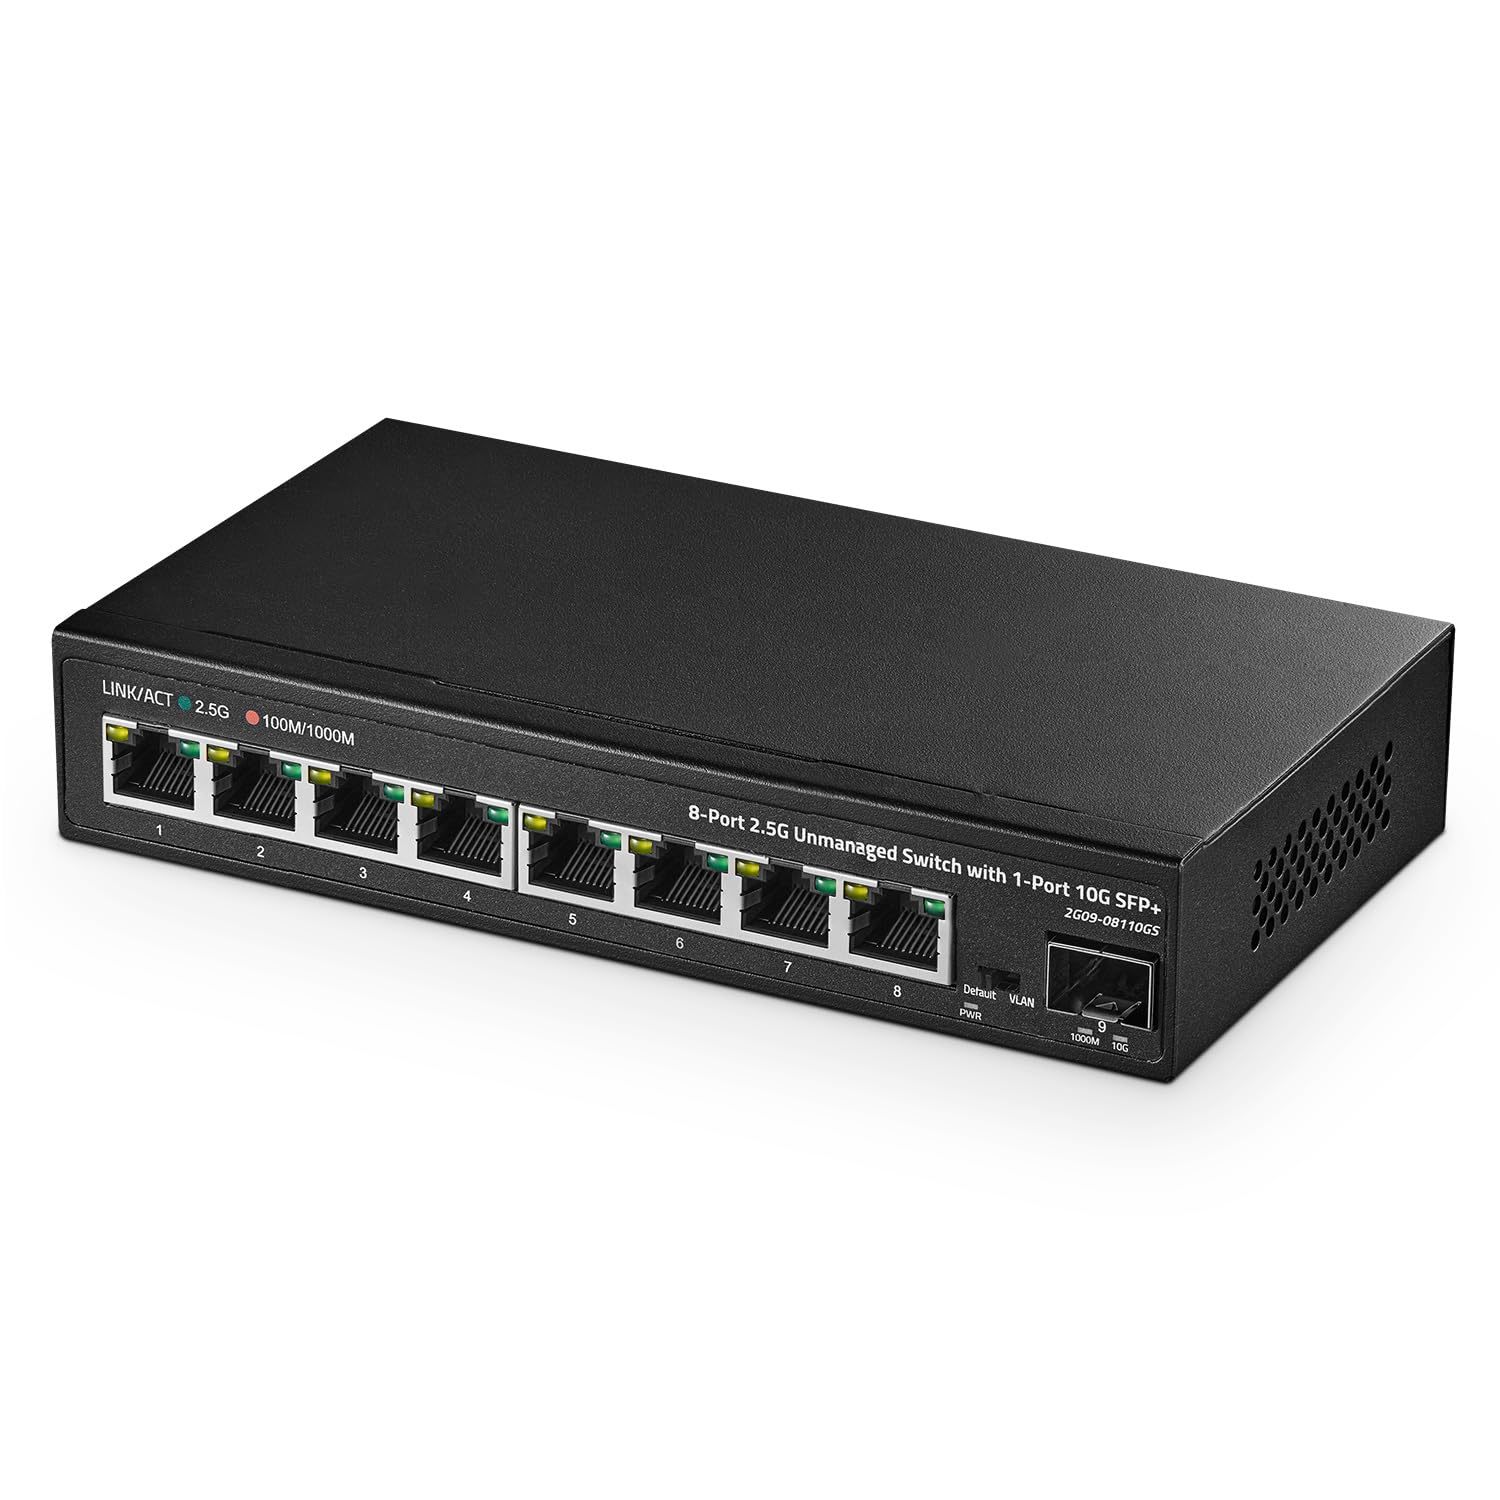 5 Port 2.5G Ethernet Switch with 10G SFP, 5 x 2.5G Base-T Ports